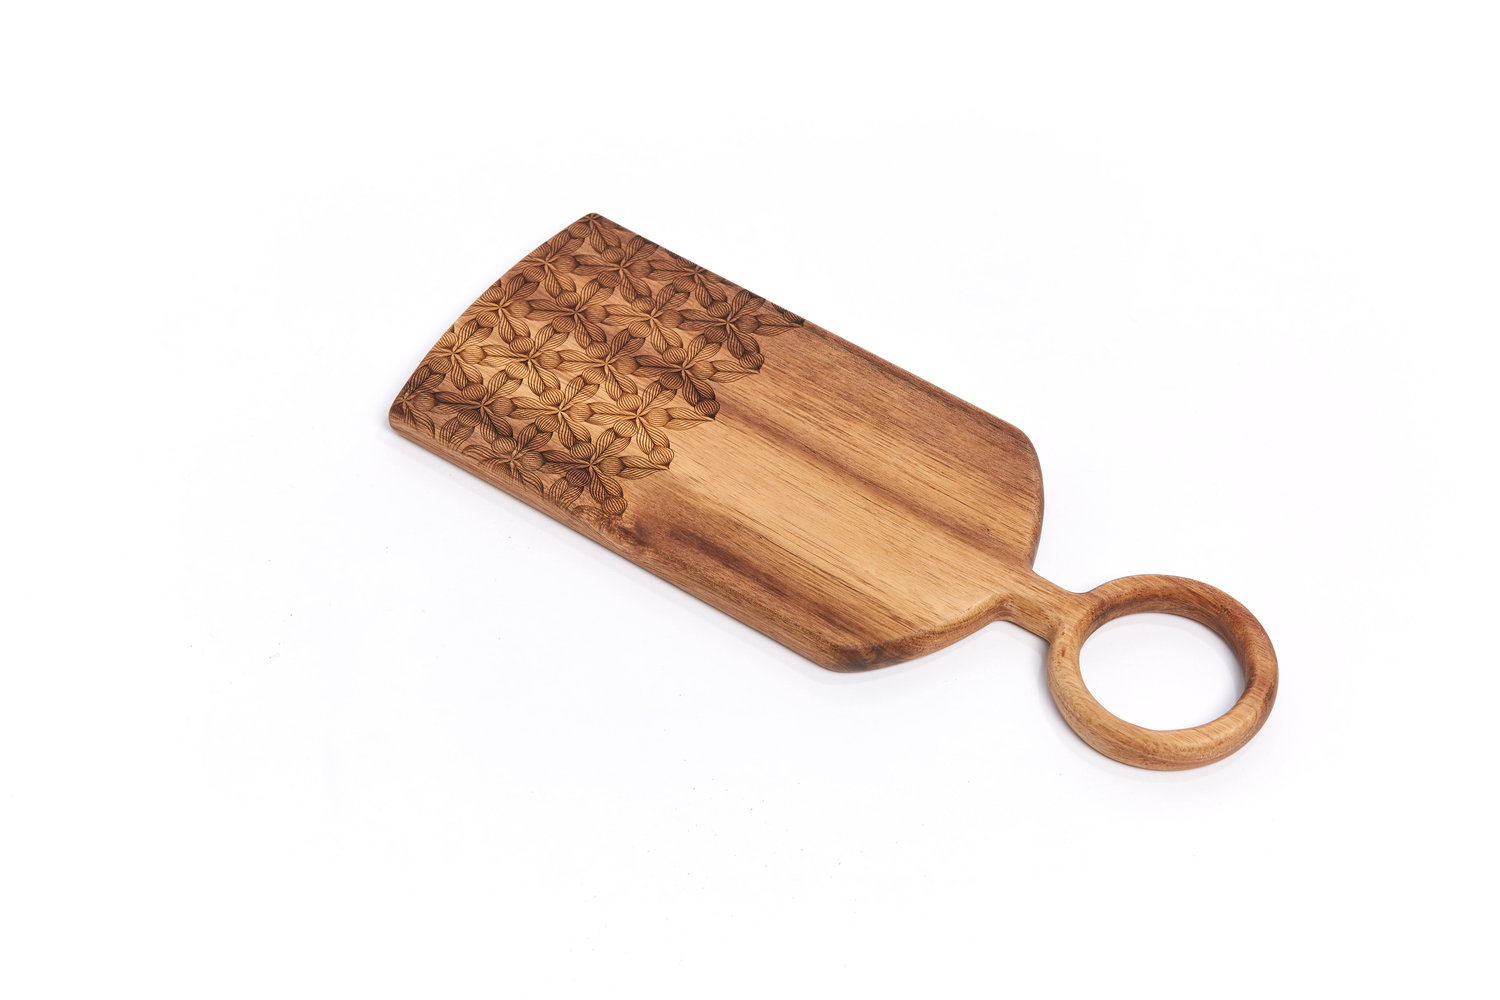 Shop Crecent Handle Serving Tray / Acacia Wood from Lucca on Openhaus